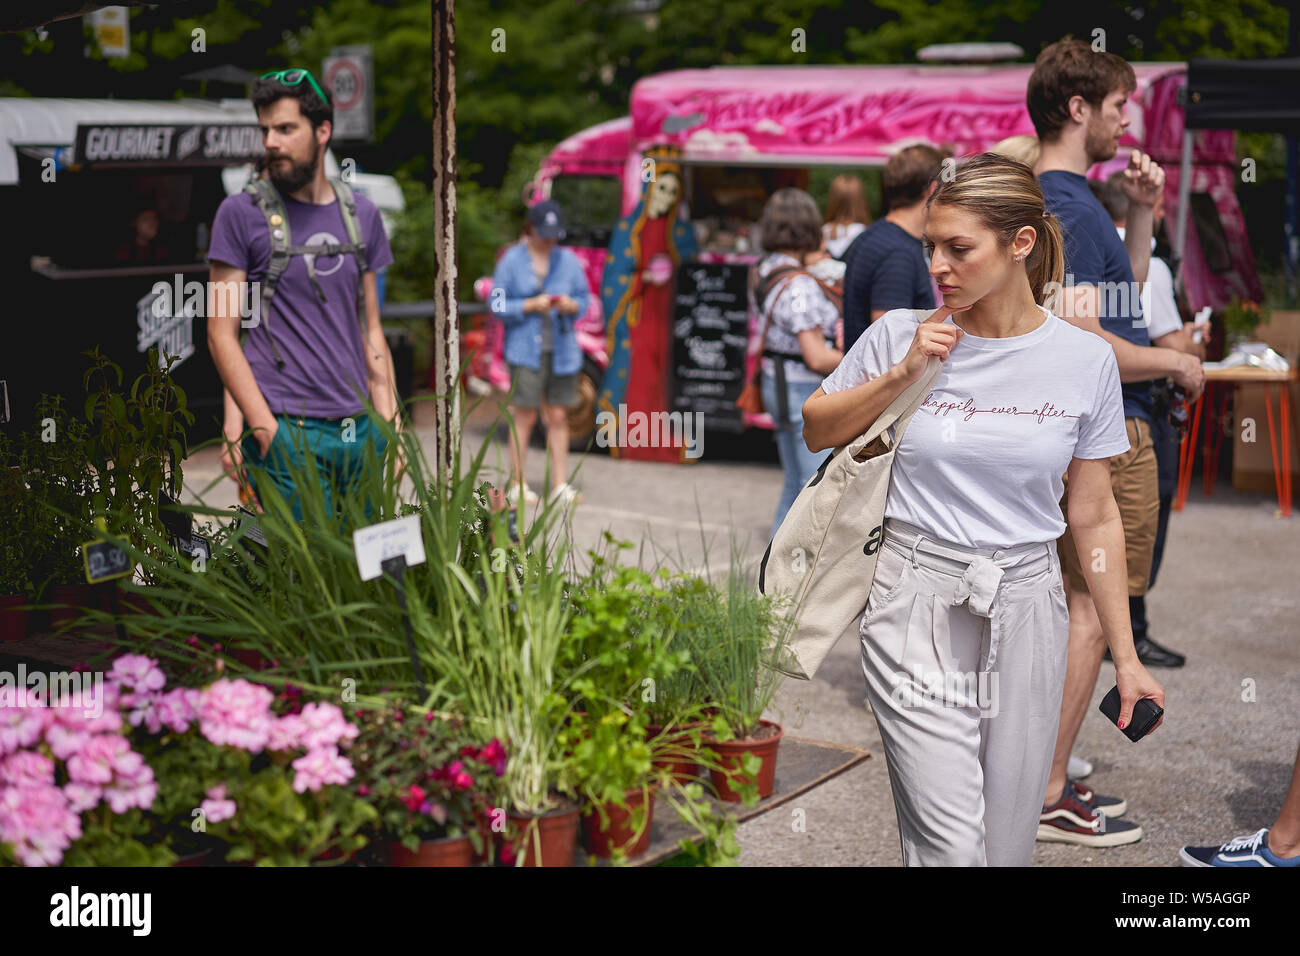 London, UK - July, 2019. Young people shopping for flowers and plants on a florist stall in Brockley market, a local farmer's market. Stock Photo